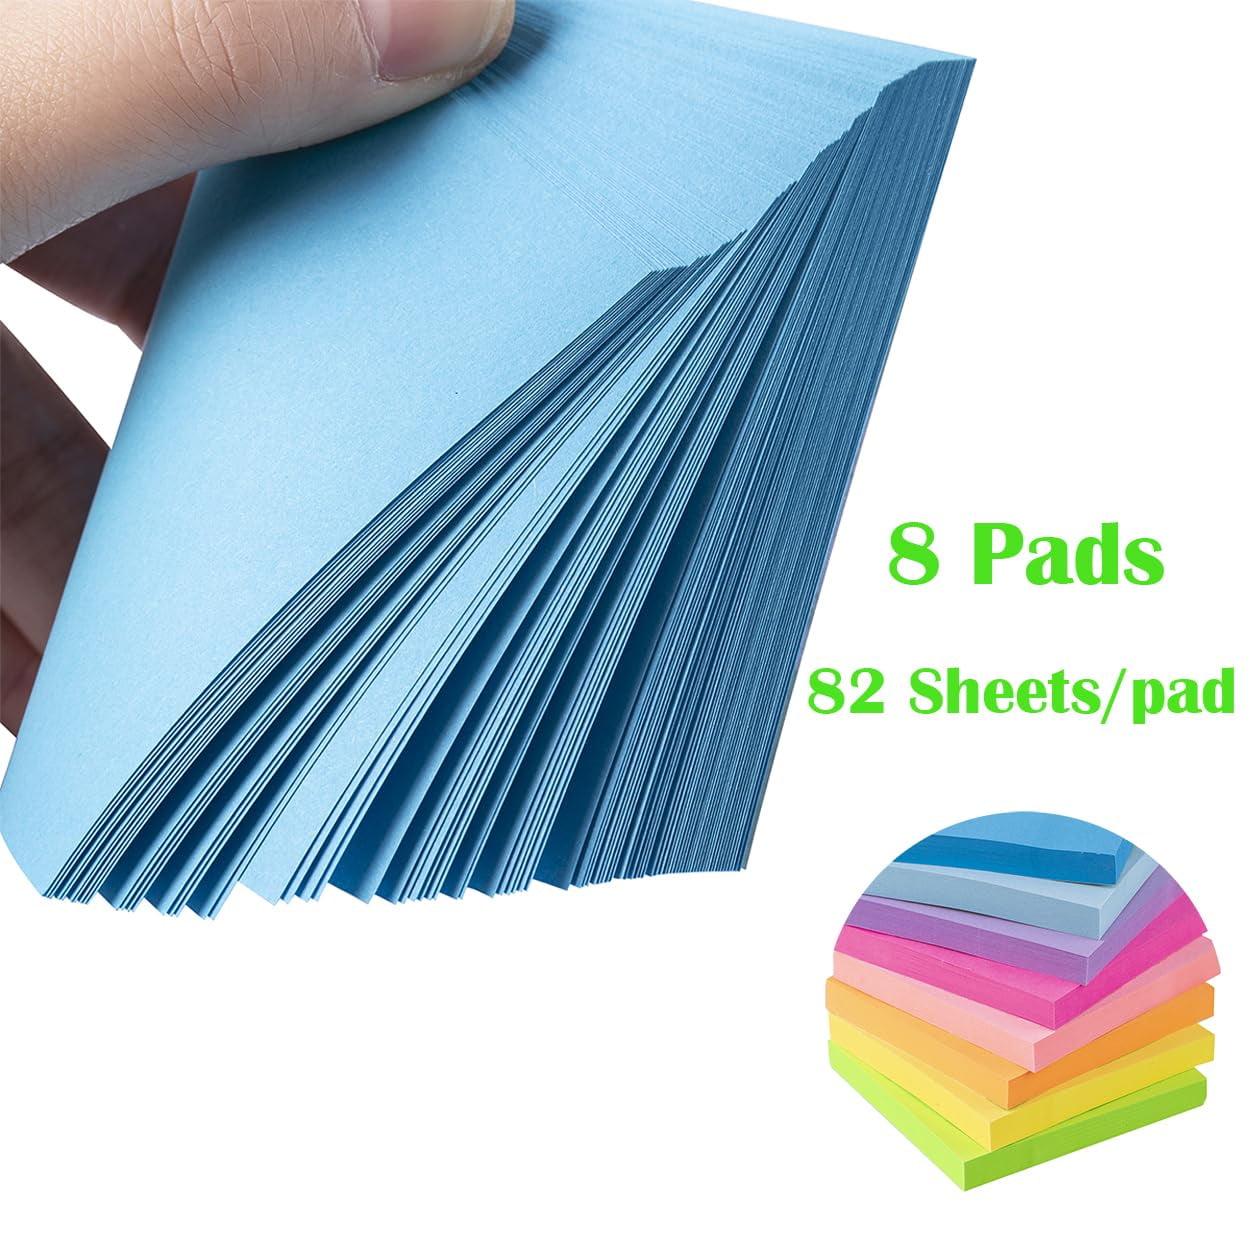 Hot Sale Bright Colors Self-Stick Pads 3X3 Inches Sticky Notes